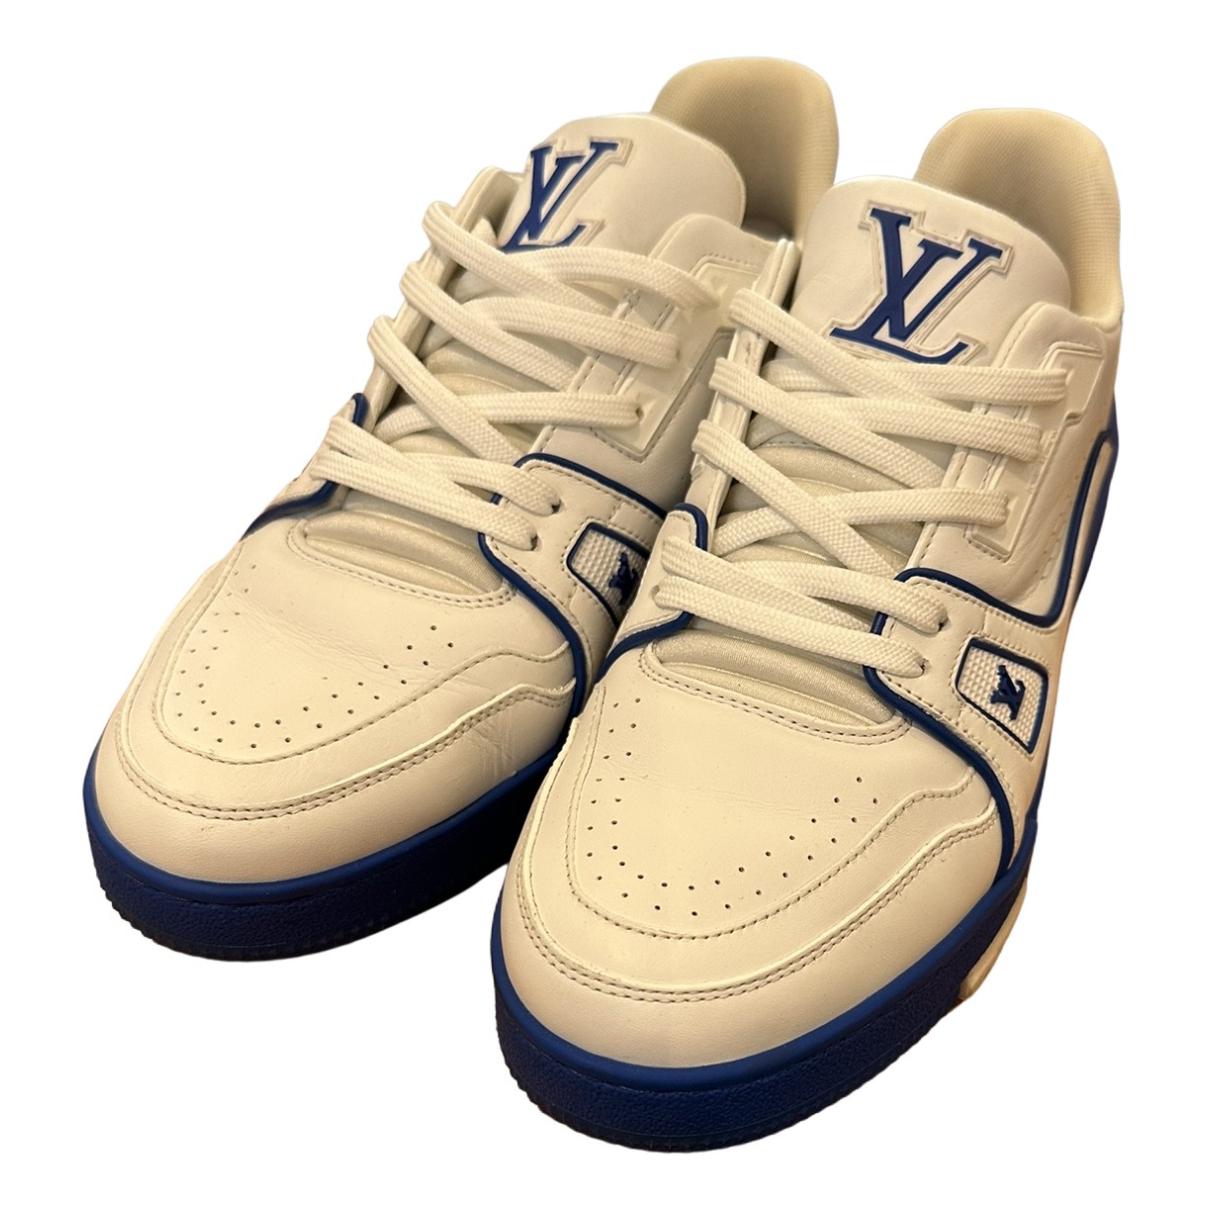 Lv trainer leather low trainers Louis Vuitton Blue size 8 UK in Leather -  27917513